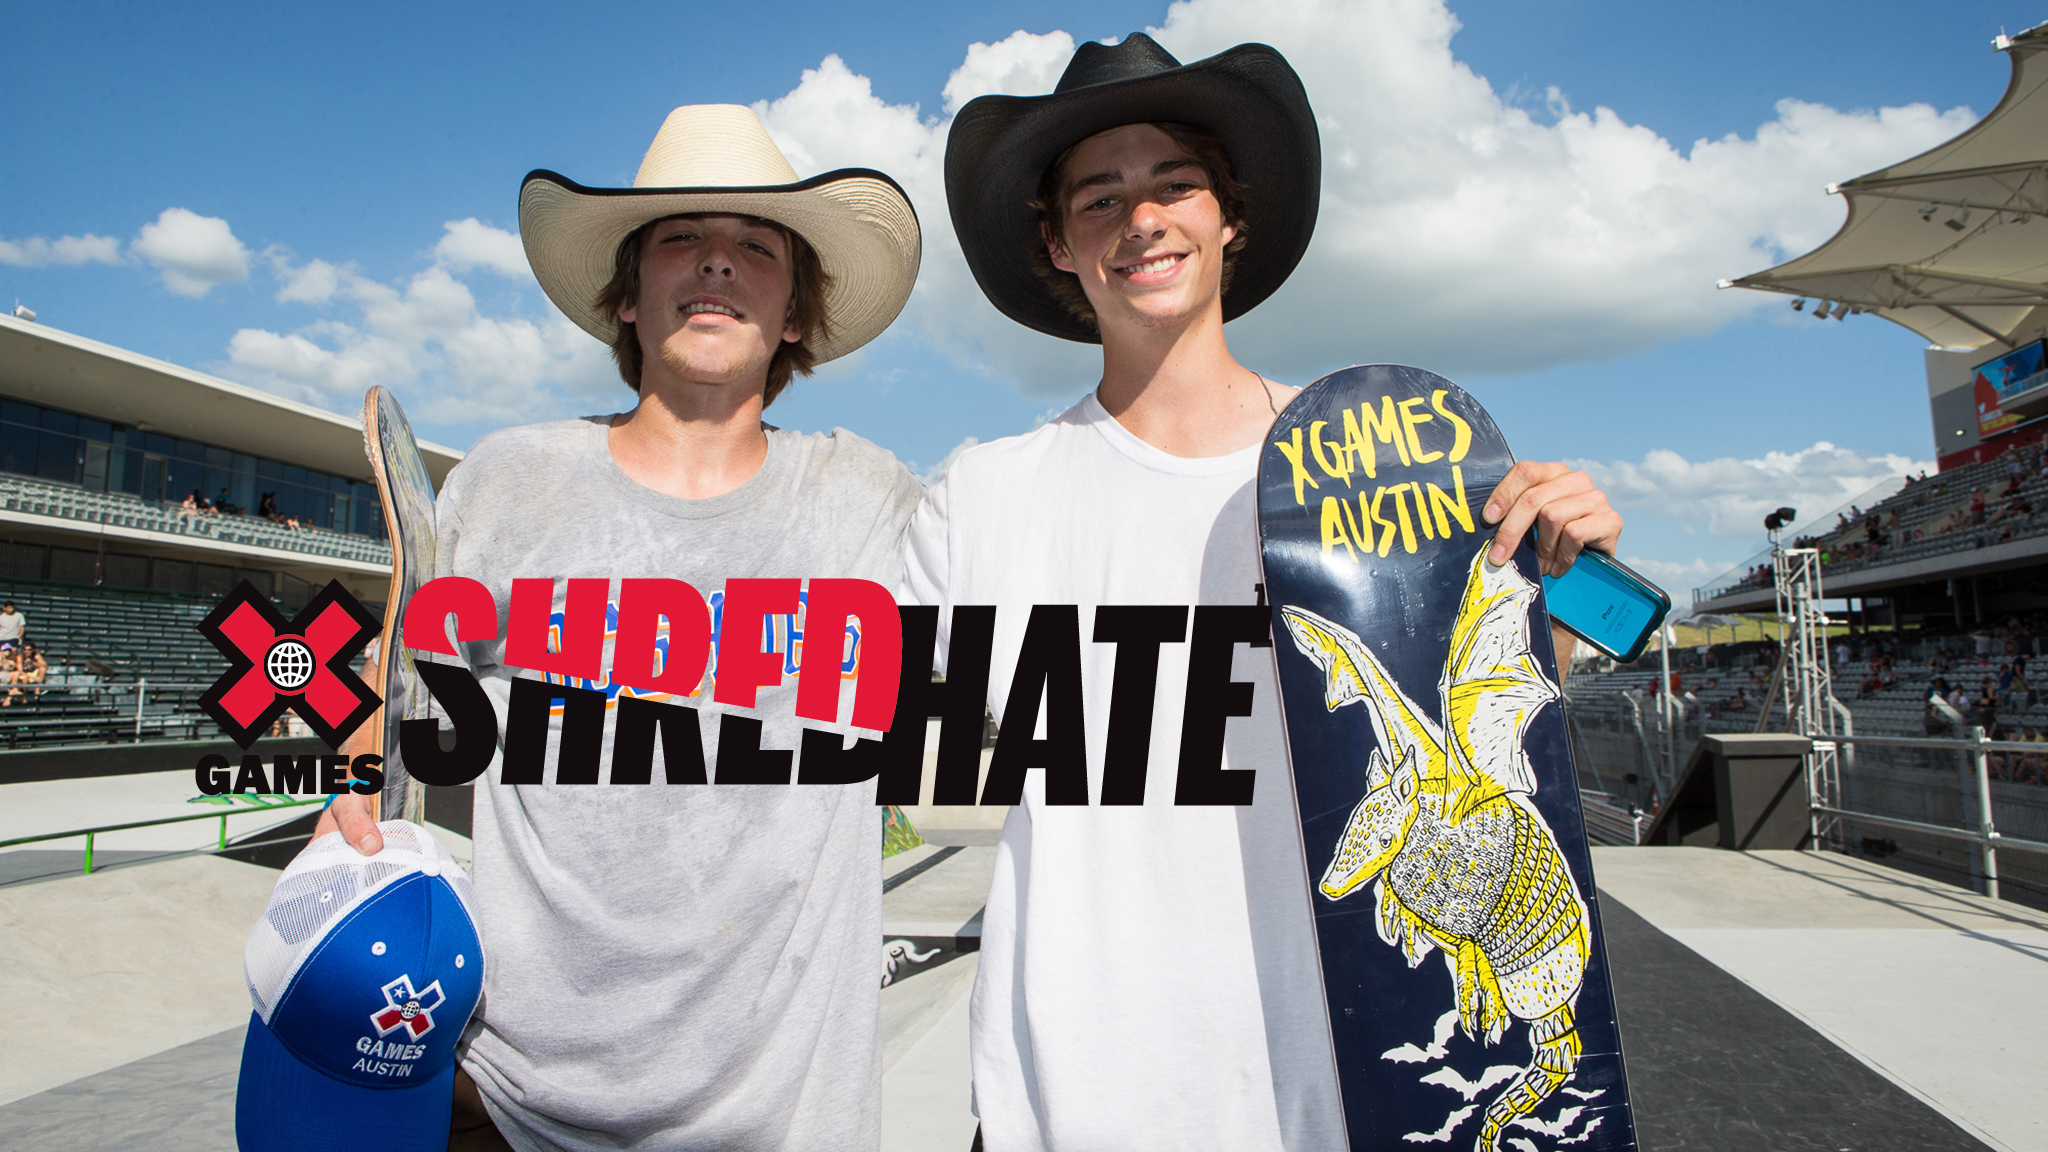 X Games Shred Hate